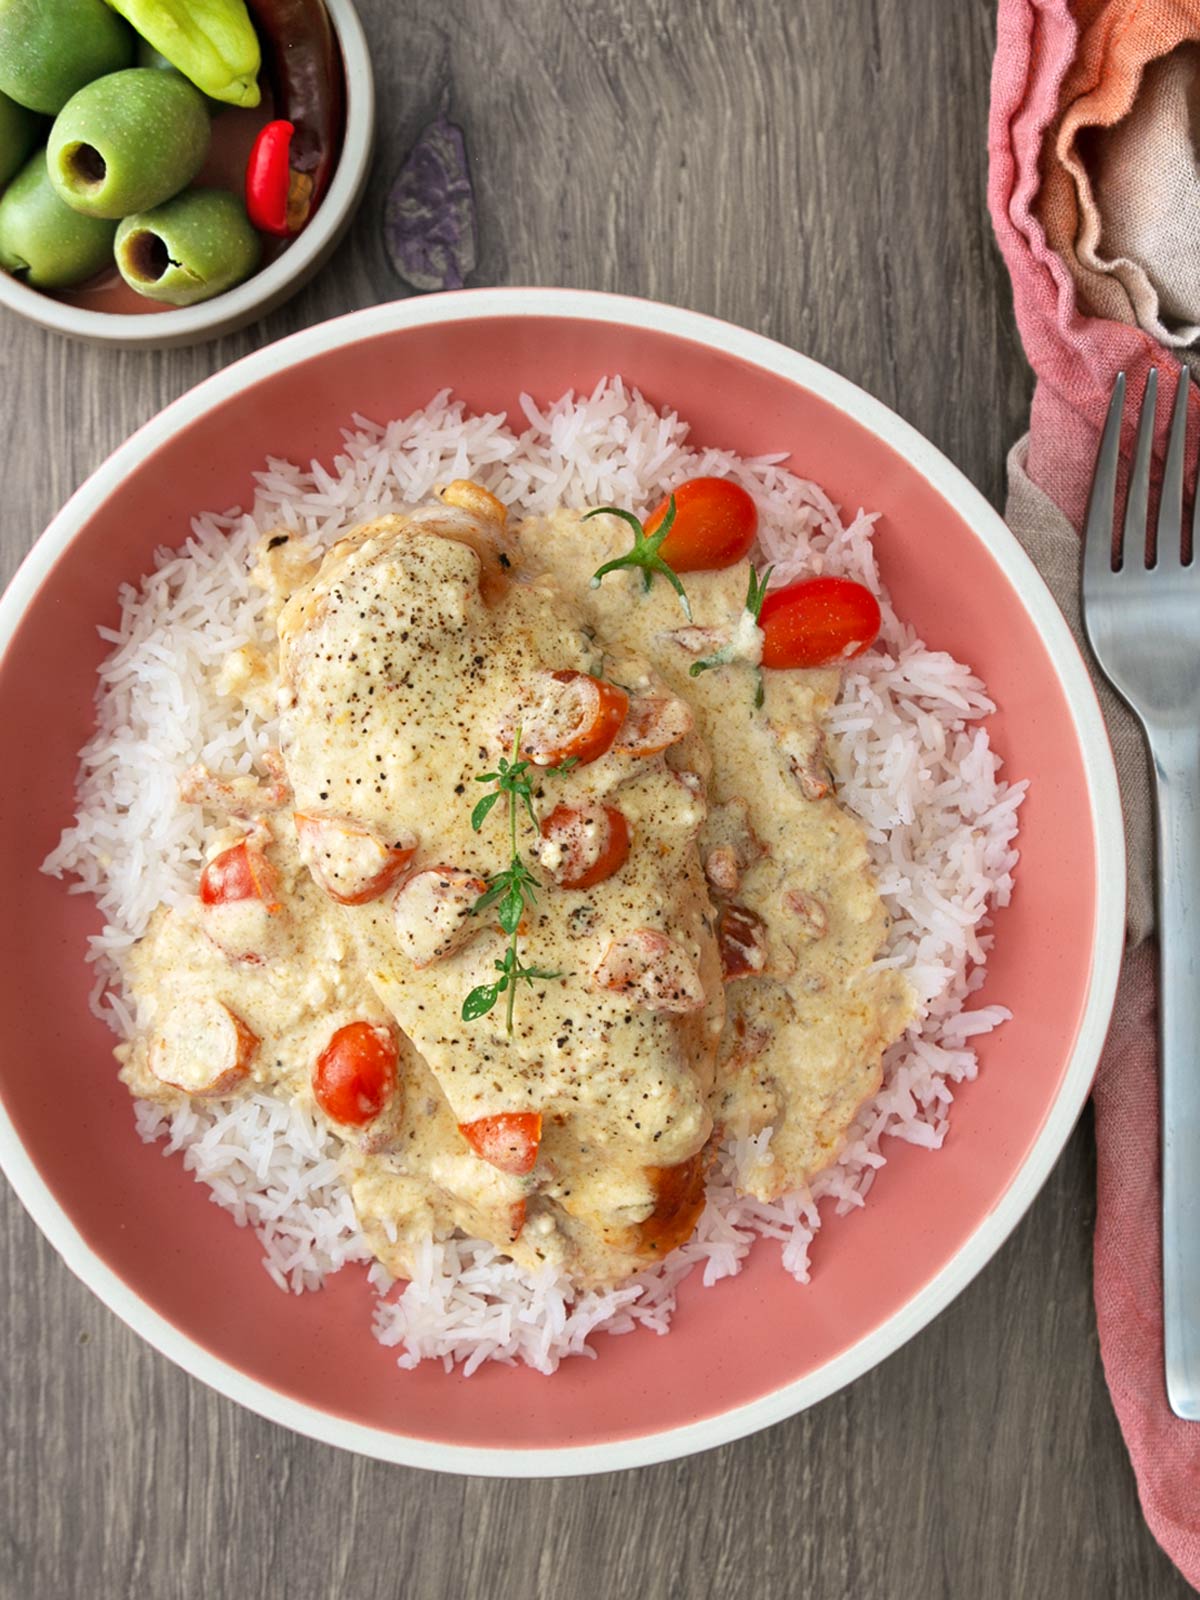 A plate of marry me chicken with rice and tomato garnish.